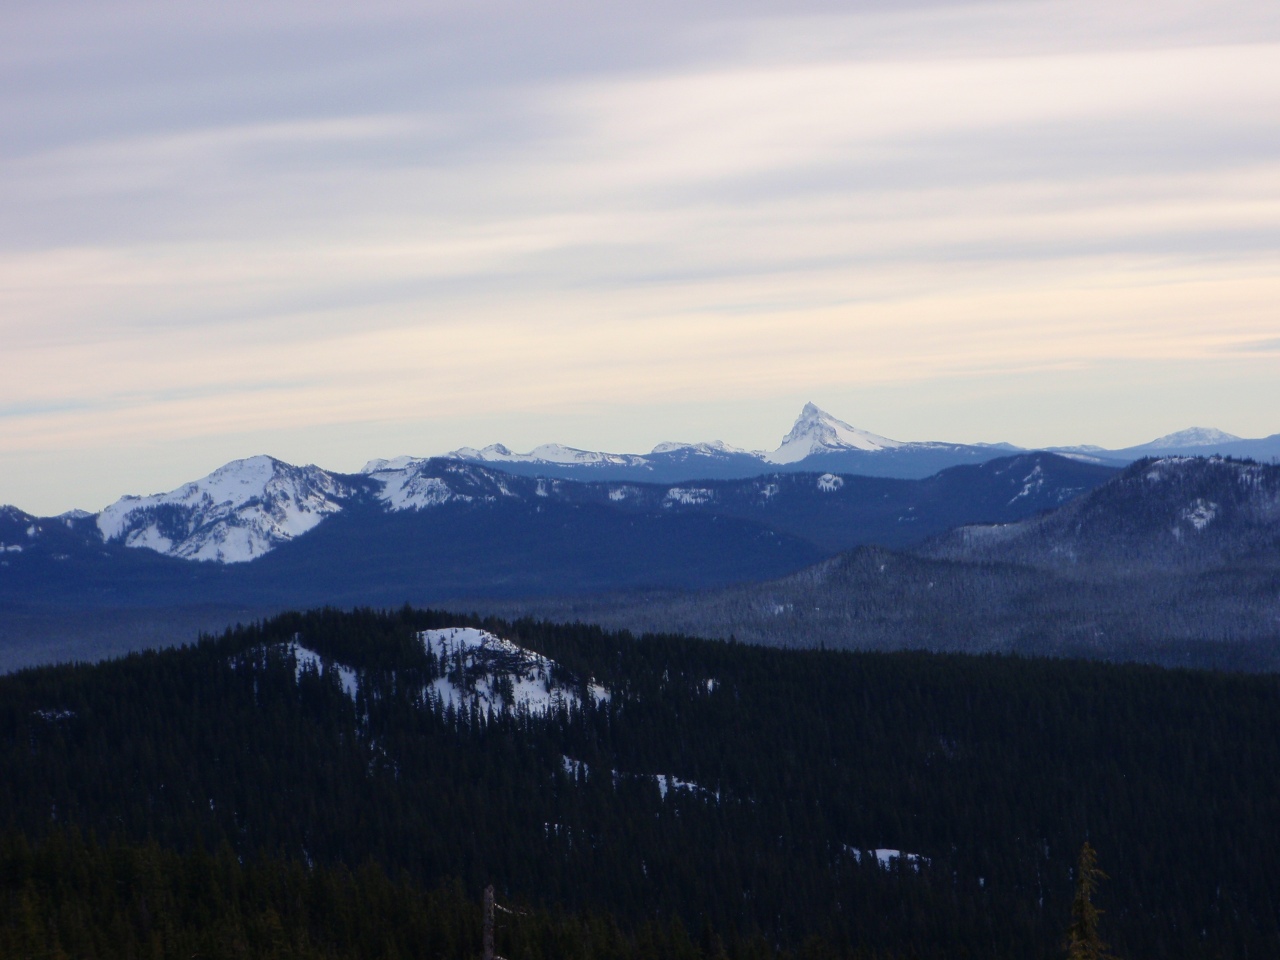 Sawtooth Mtn and Mt Thielsen